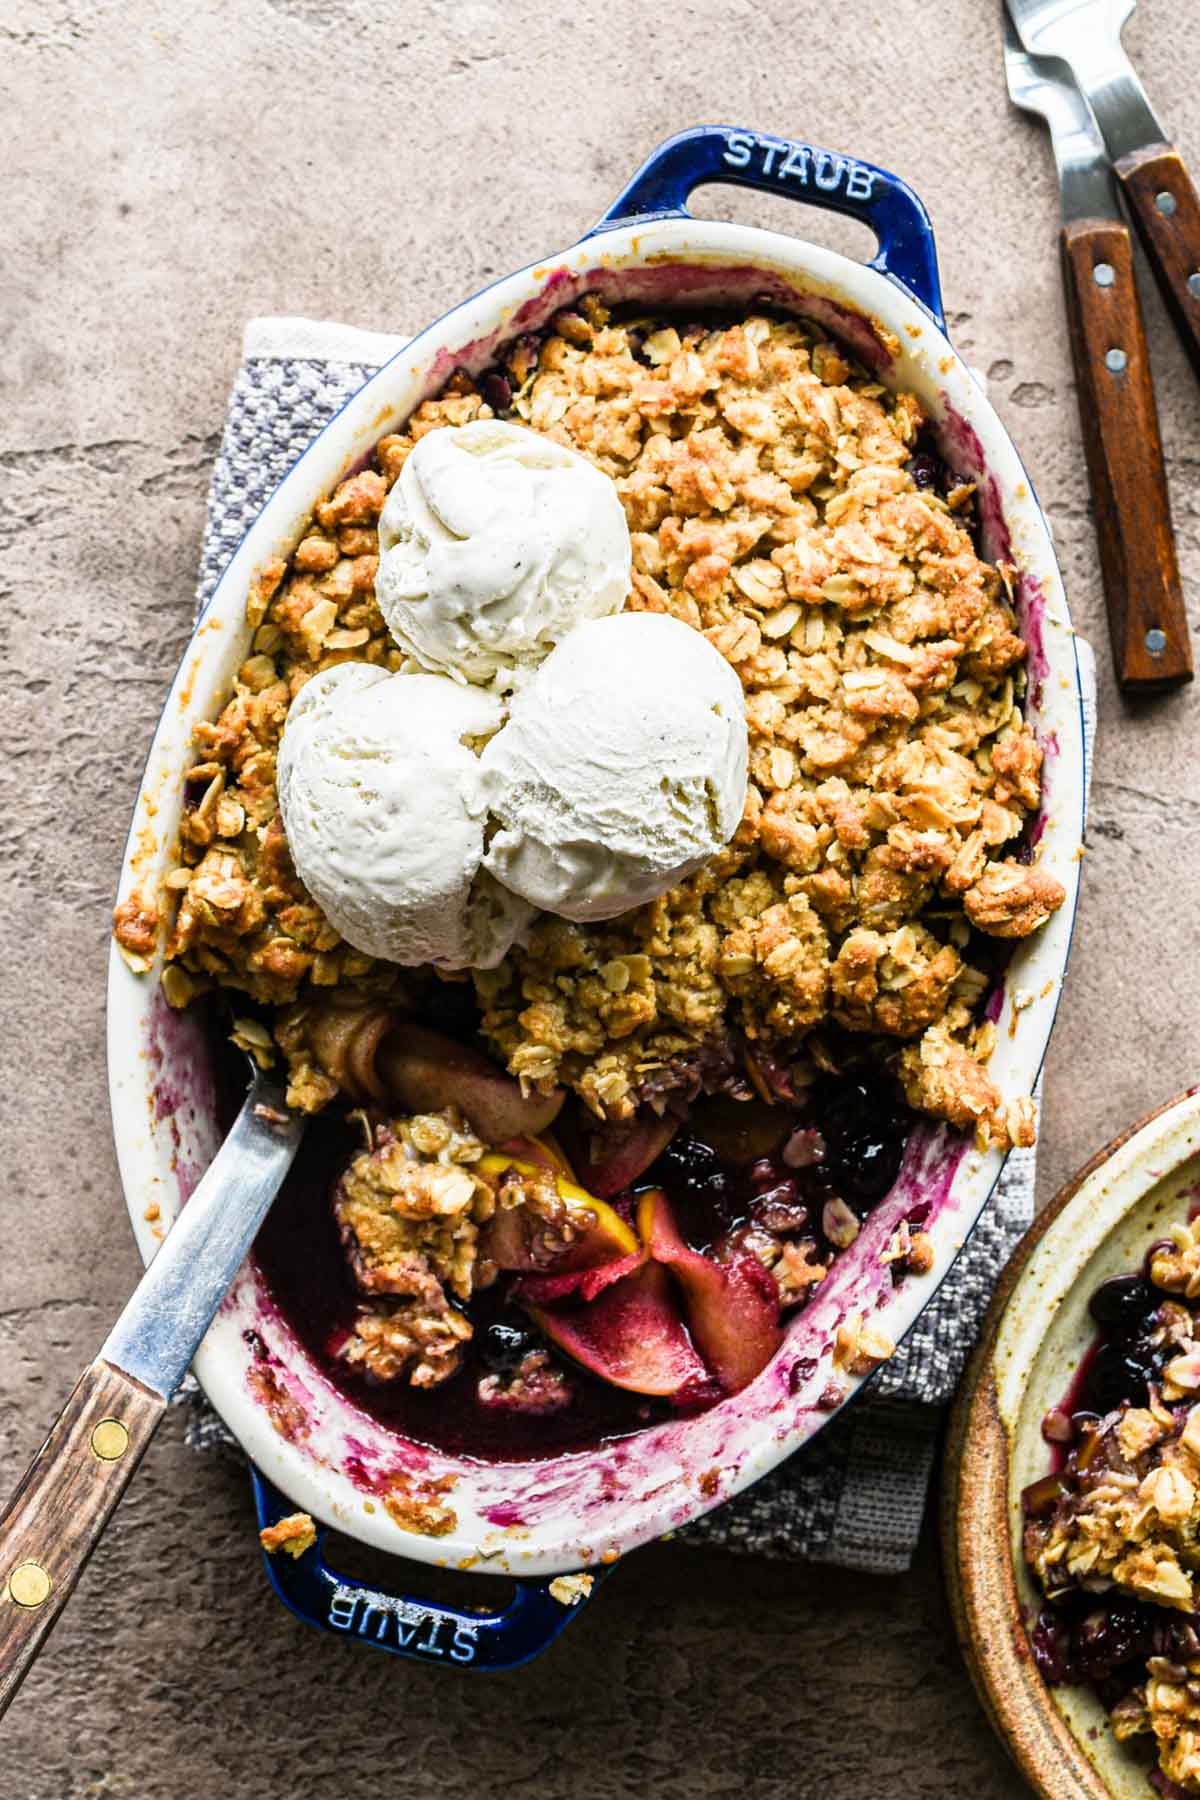 Freshly baked apple blueberry crumble with ice cream.